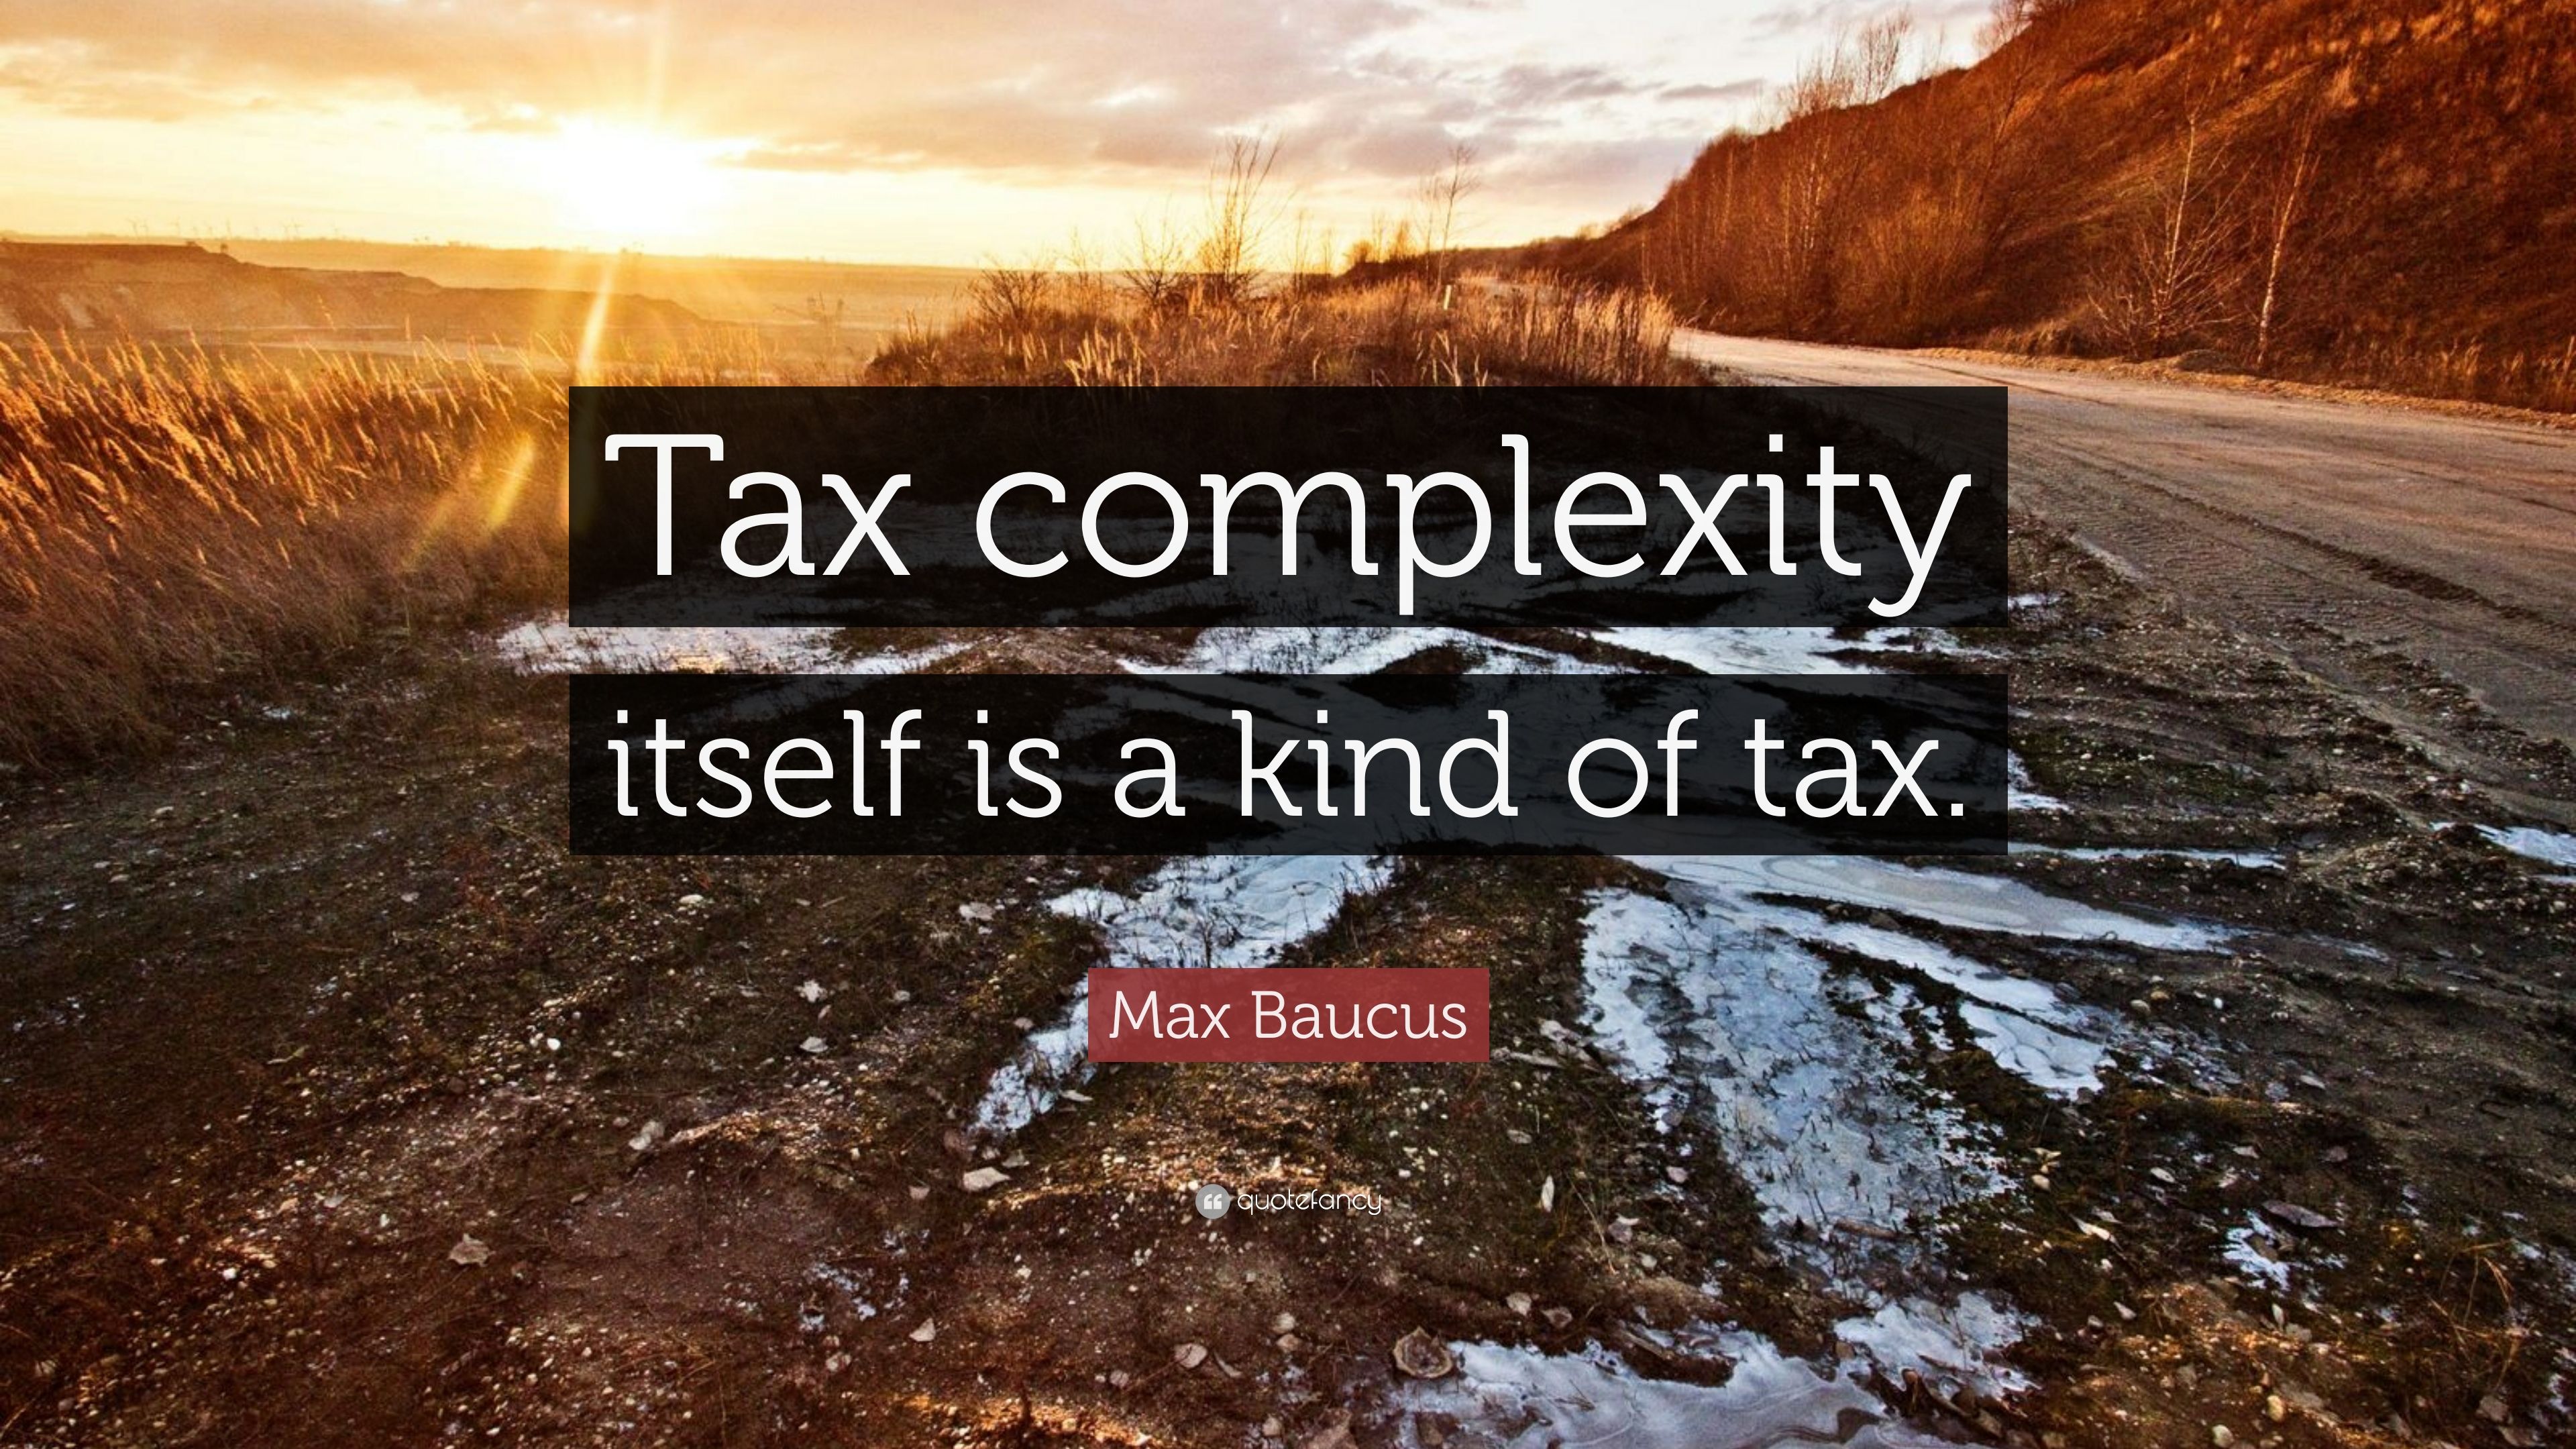 Max Baucus Quote: “Tax complexity itself is a kind of tax.” 7